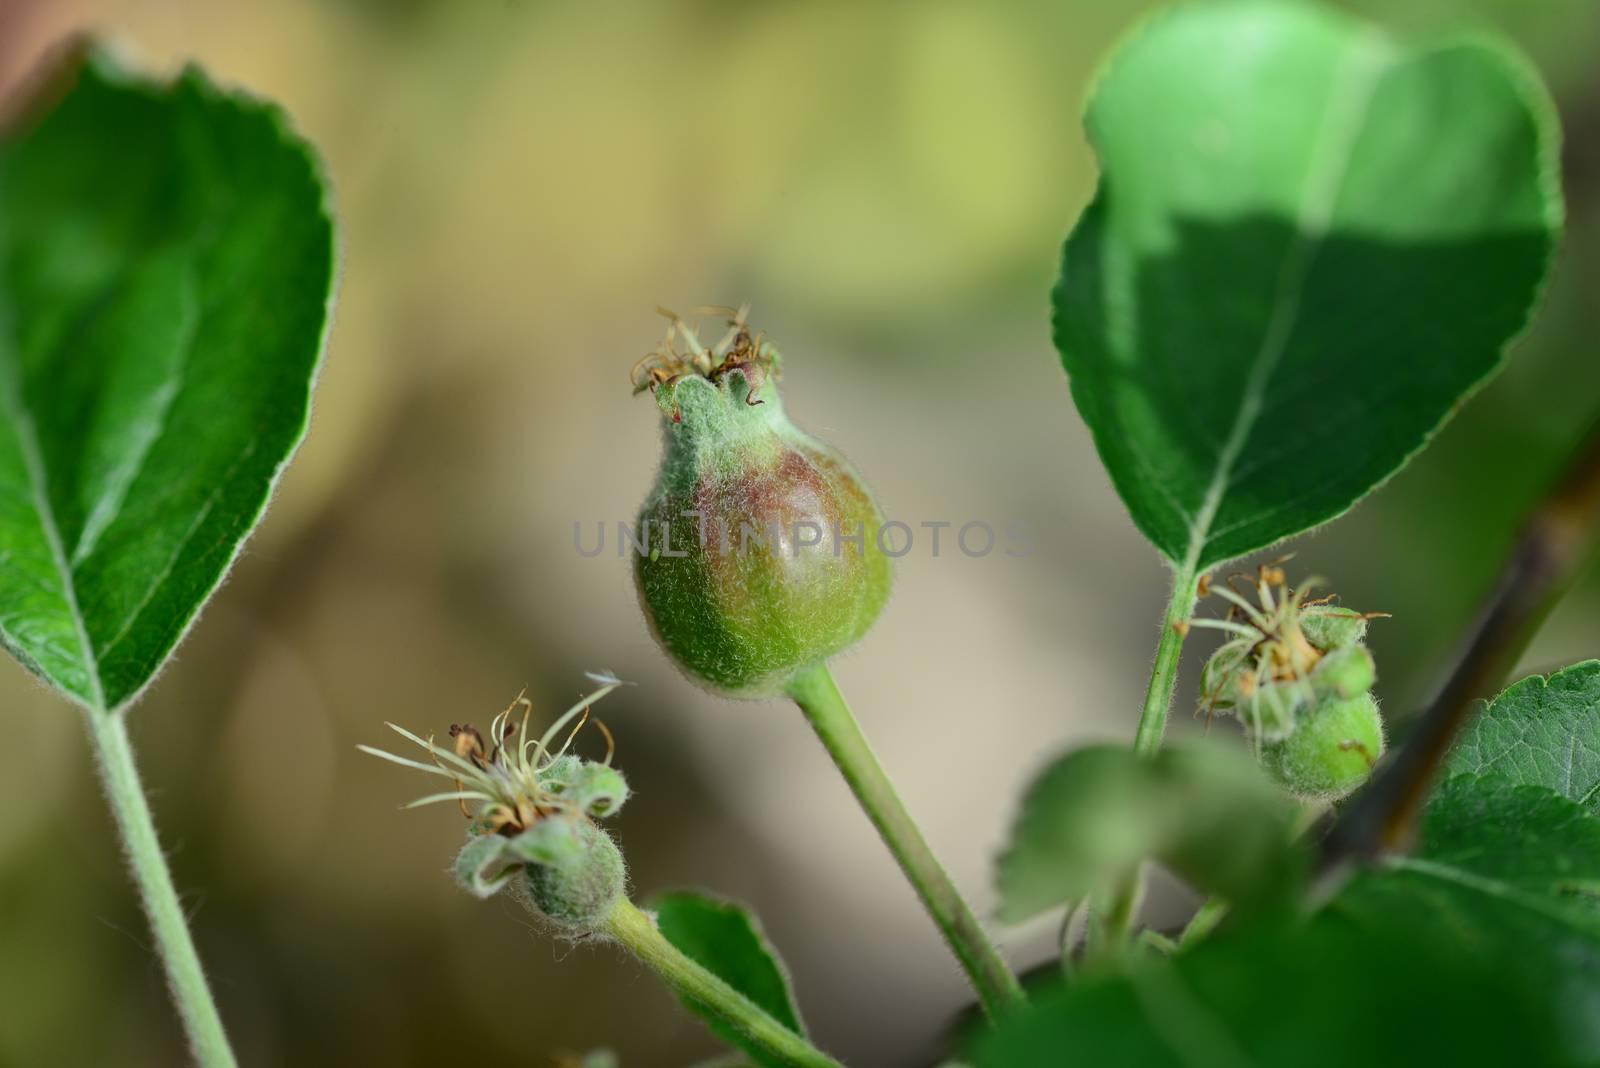 Unripe Apple Embryo close detail with natural background